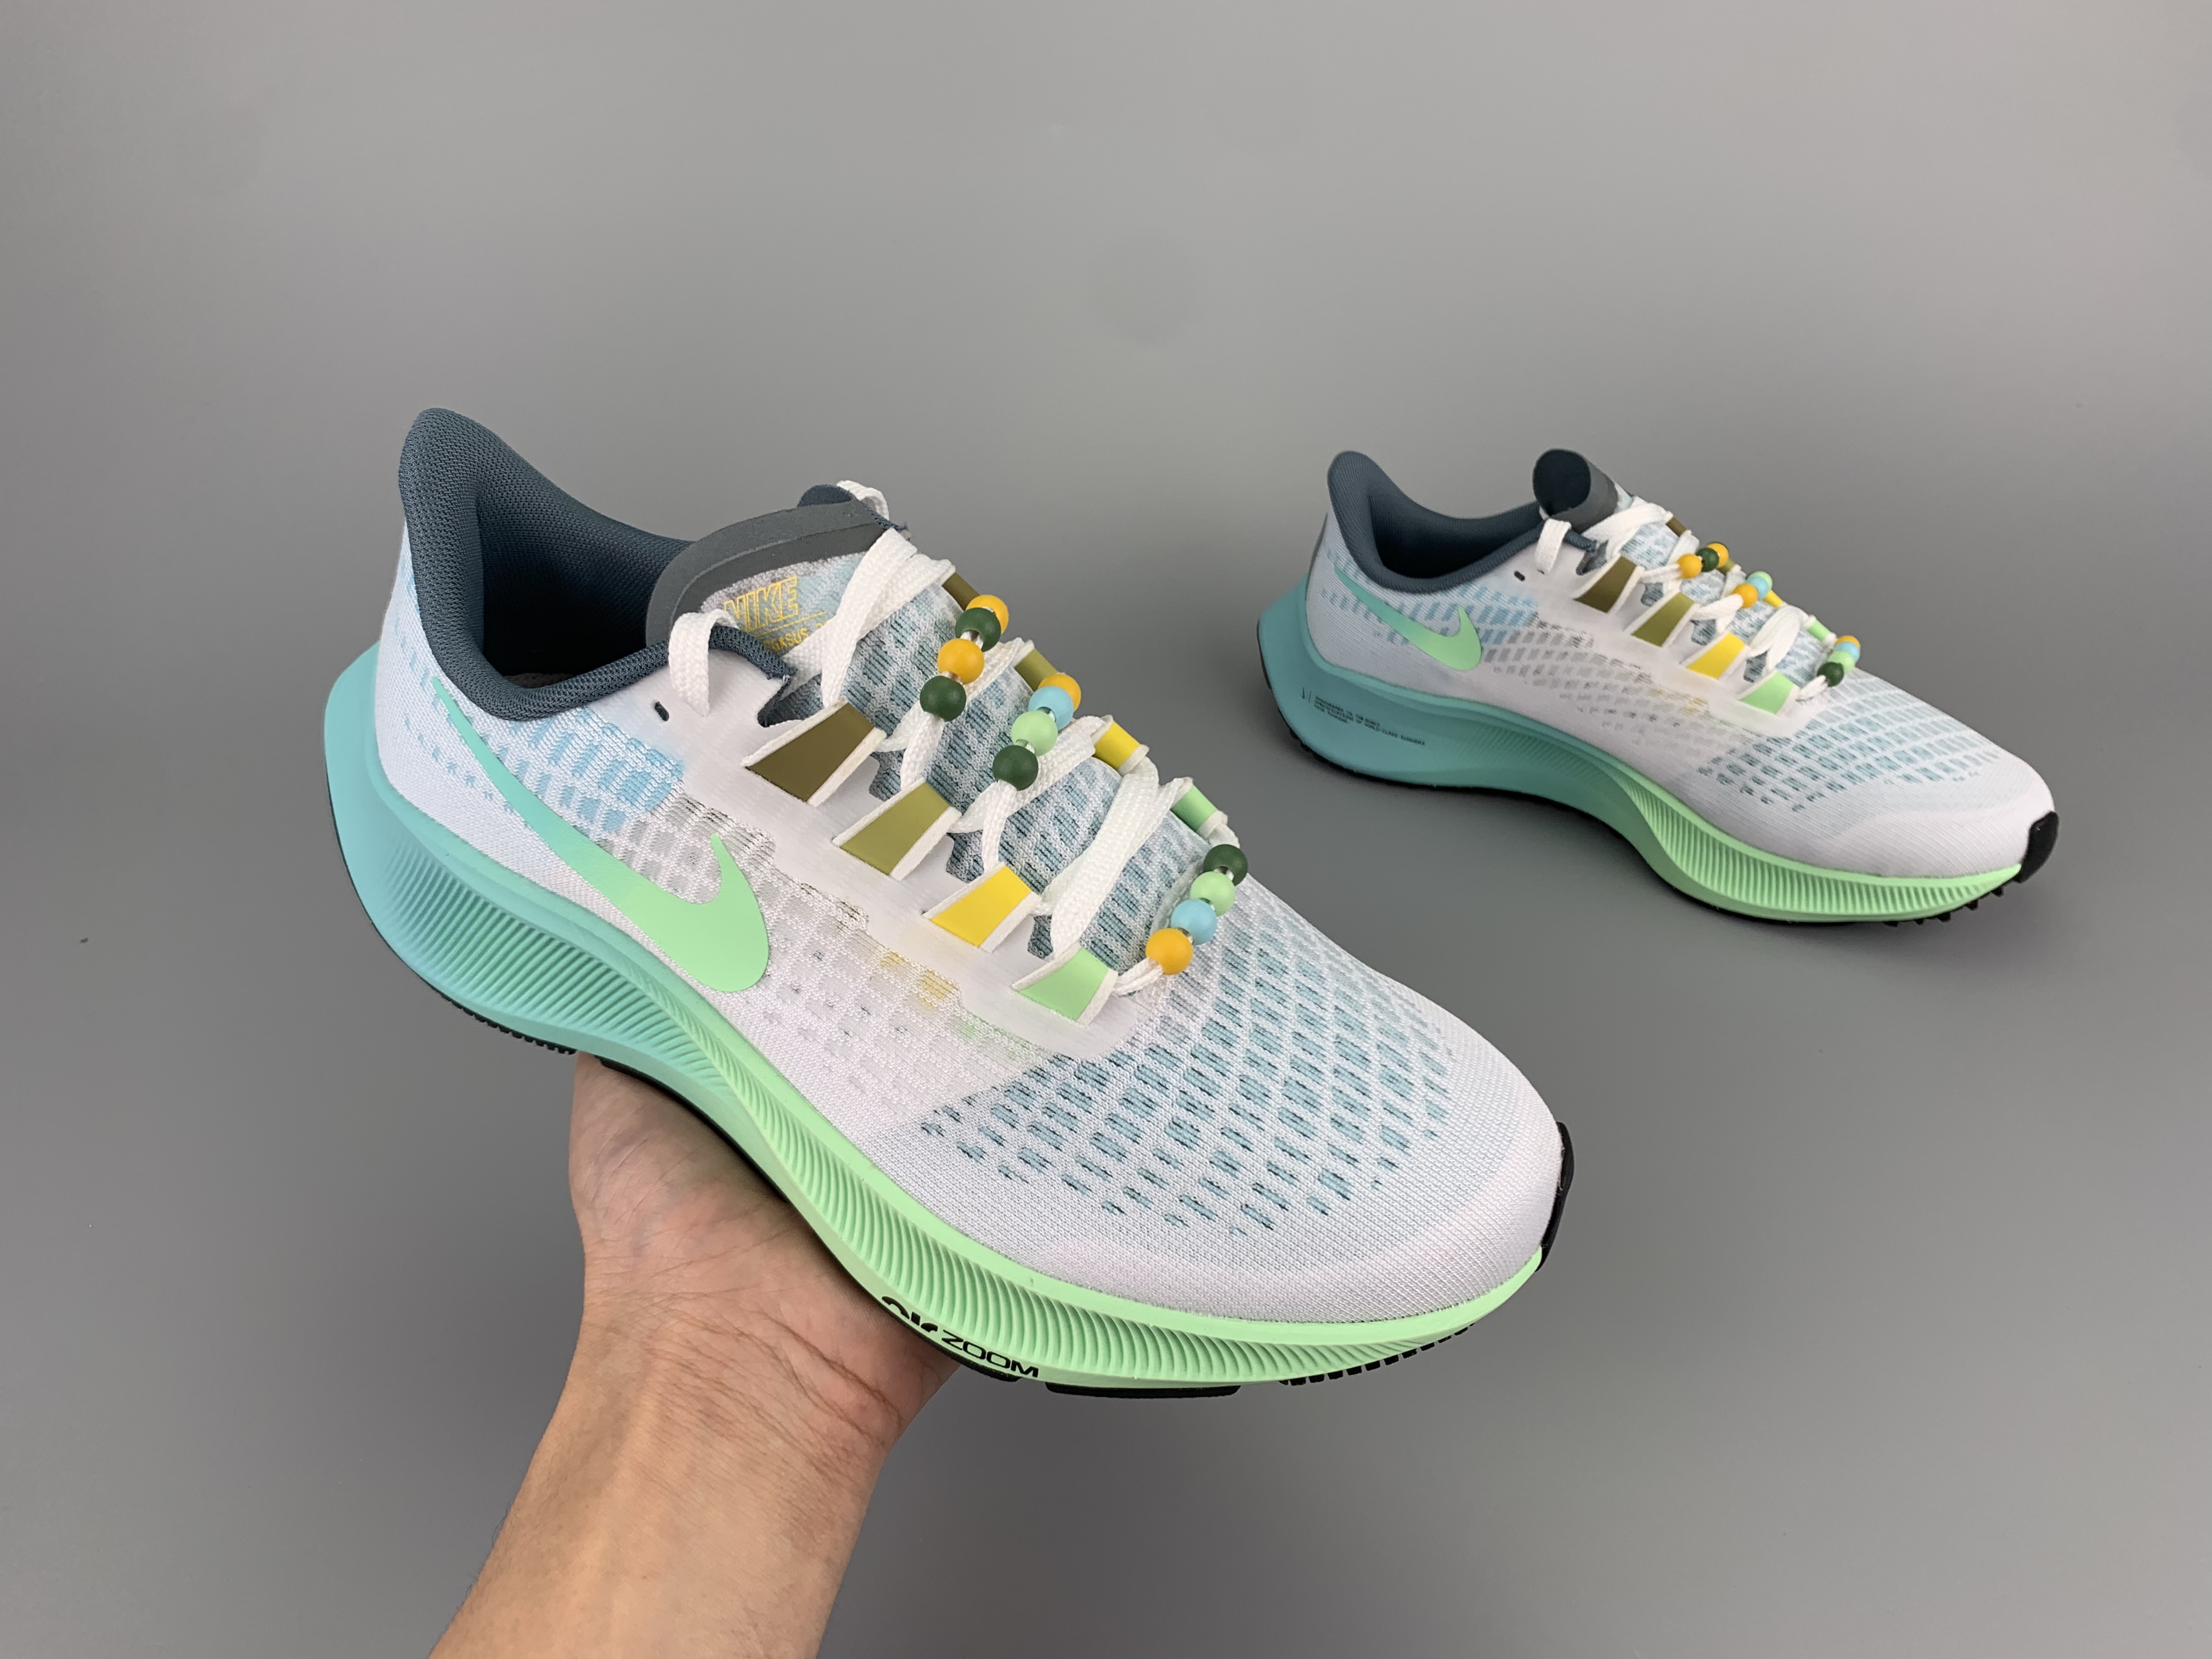 New Nike Zoom Pegasus 37 Grey Green Running Shoes For Women - Click Image to Close